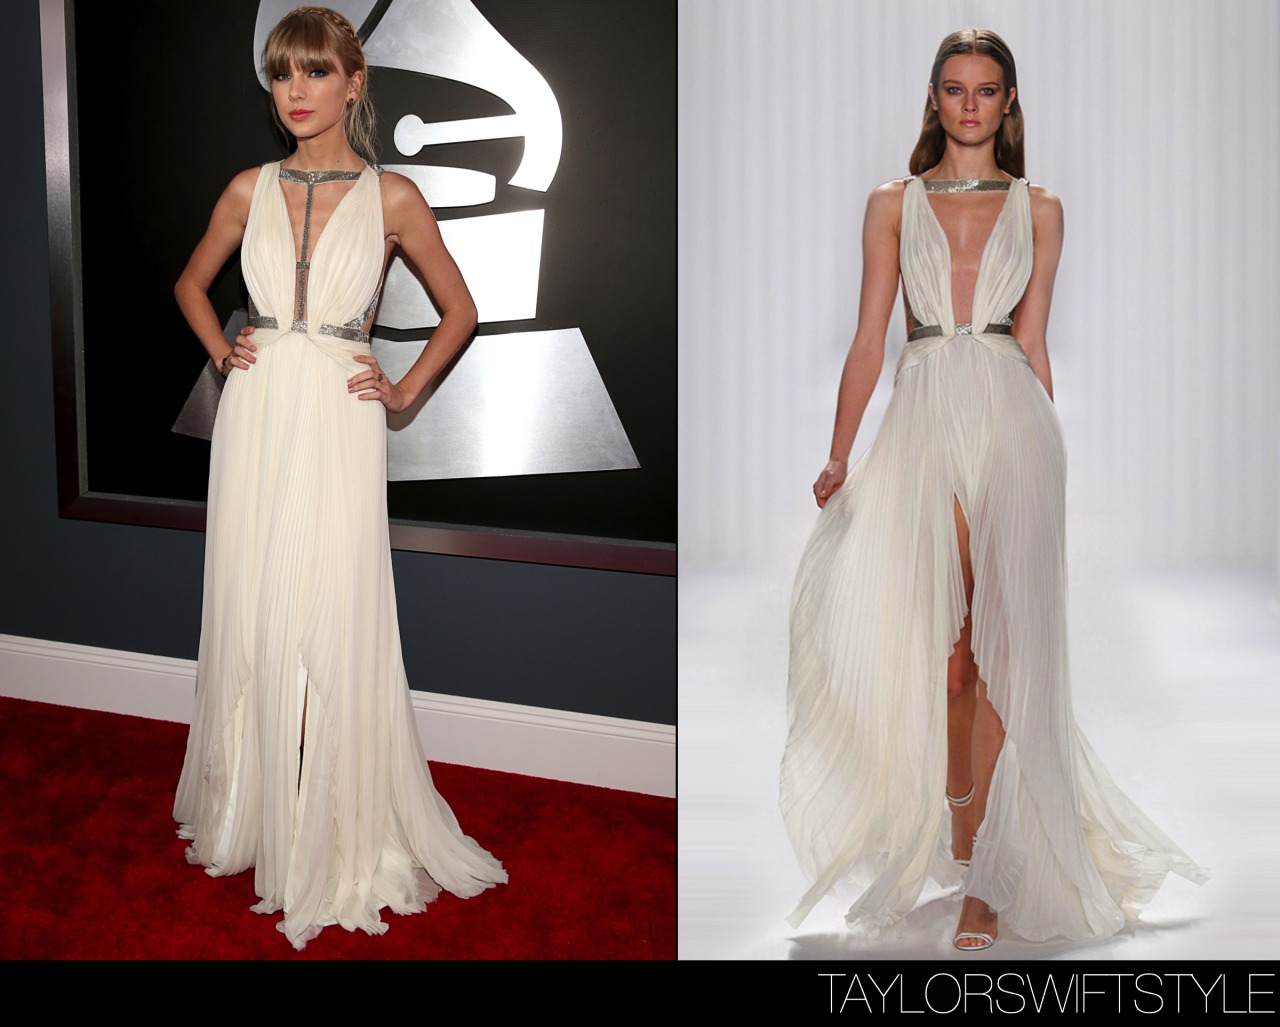 taylorswiftstyle:The 55th Annual GRAMMY Awards | Los Angeles, CA | February 10, 2013J Mendel Spring 2013 RTW (Look 45)Looking like a grecian goddess, this gown by J Mendel was saved from being just another ivory chiffon confection in Taylor’s repertoire by that thigh-high slit and micro-bugle metallic straps that were custom-fitted on the plunging neckline for Tay’s version of the runway dress.Taylor walked the GRAMMY red carpet after already picking up a gramophone for Best Song for Visual Media with 